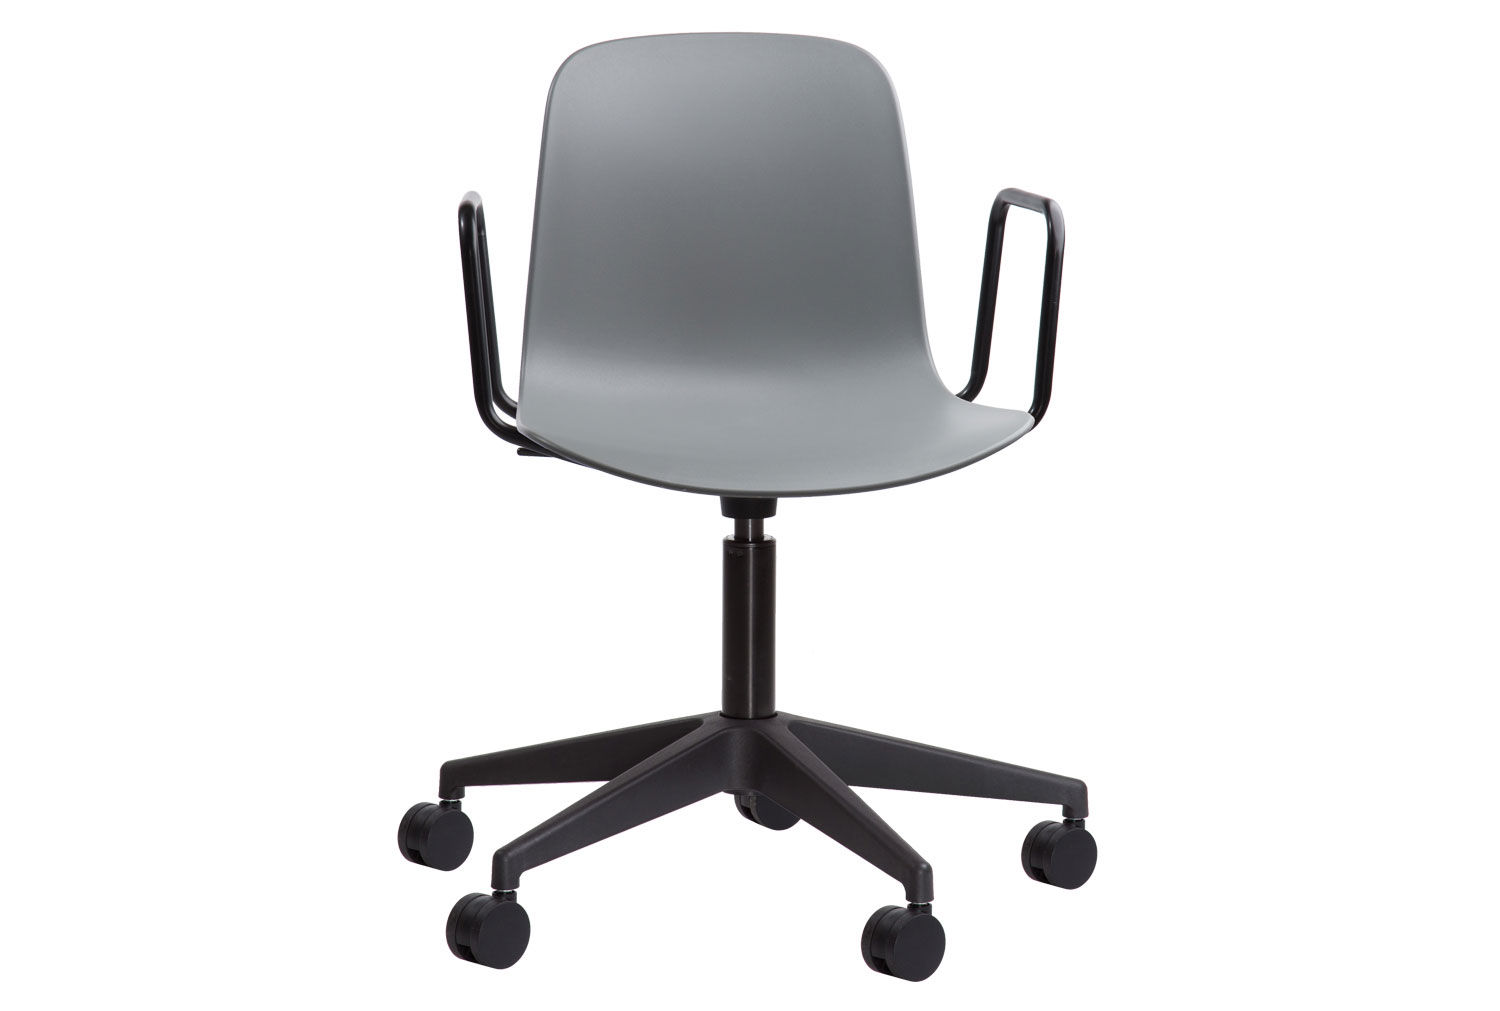 Qty 4 - Connors Task ArmOffice Chair, Signal Orange